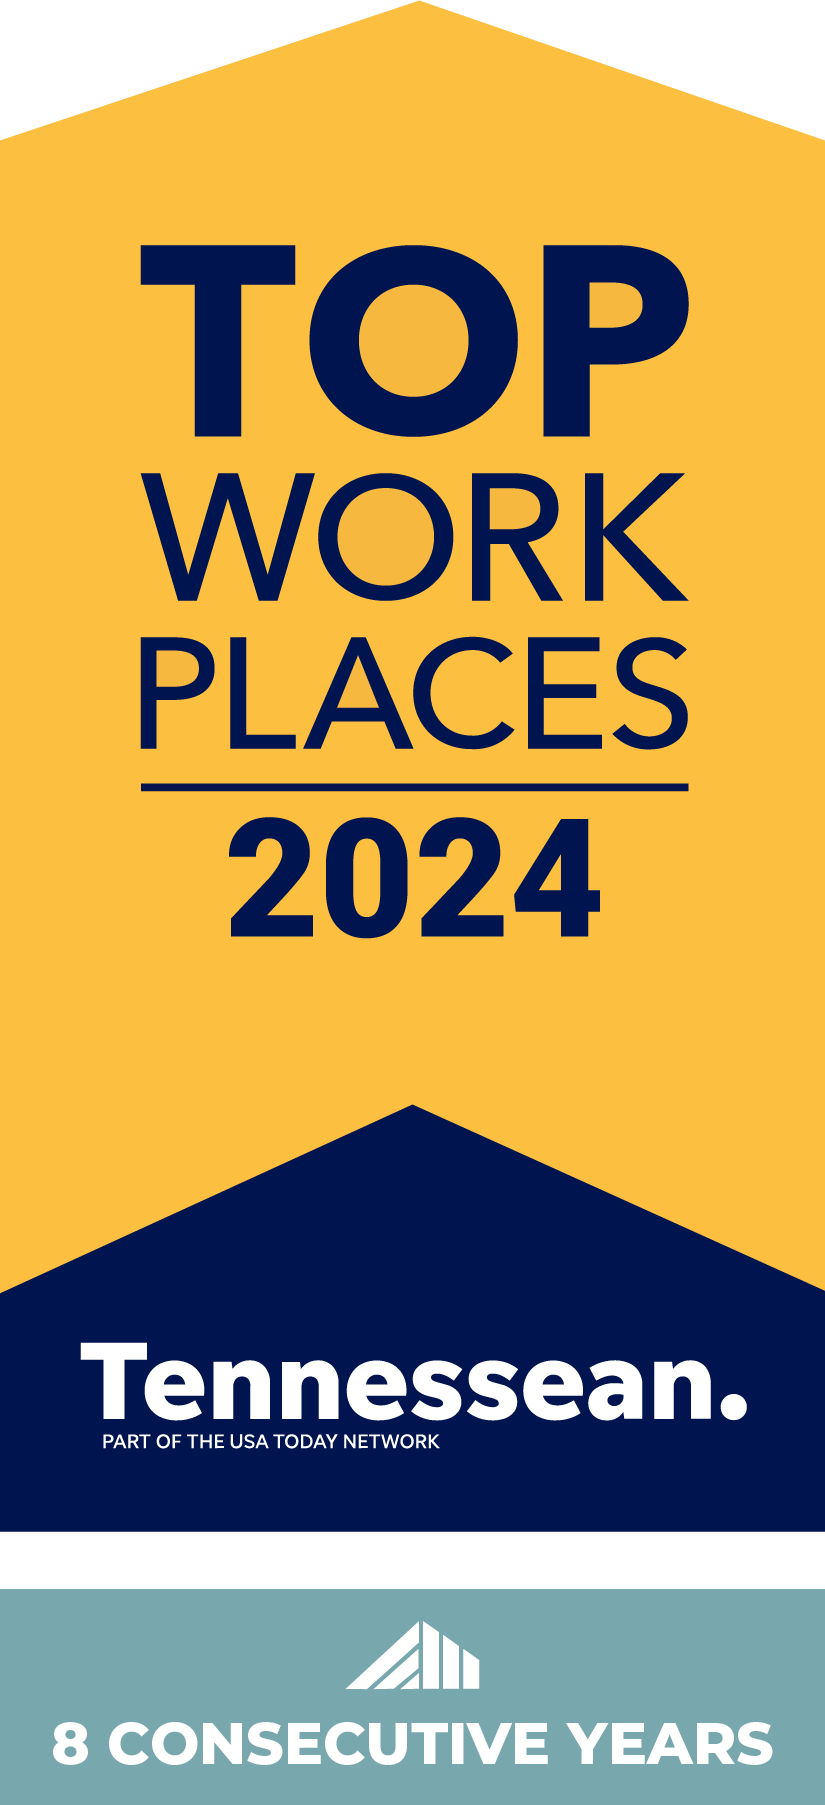 Top Work Places - 2024 - Tennessean